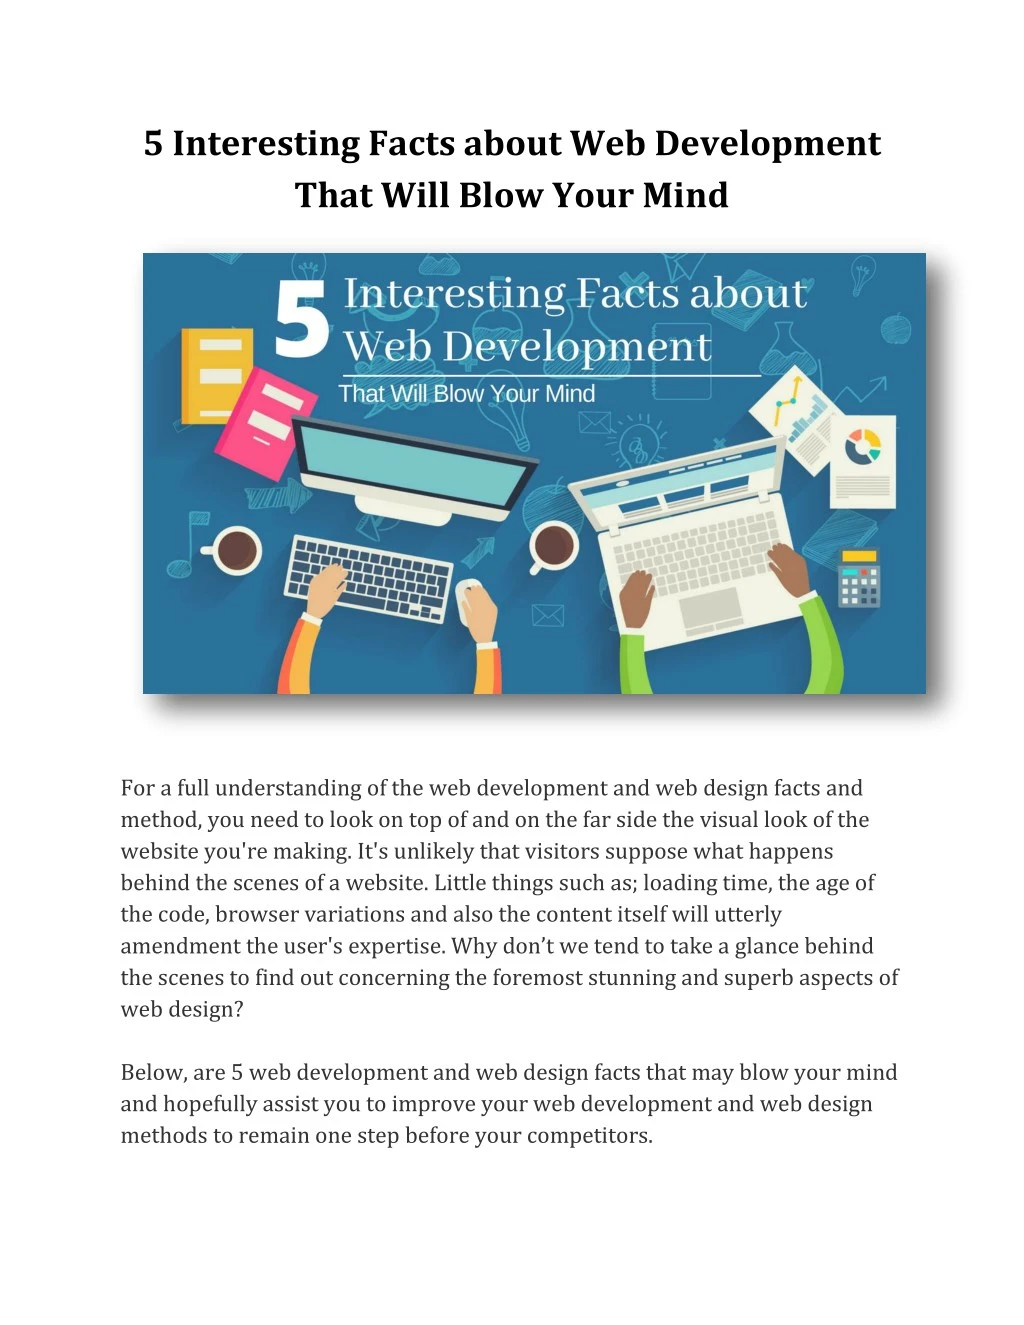 5 interesting facts about web development that